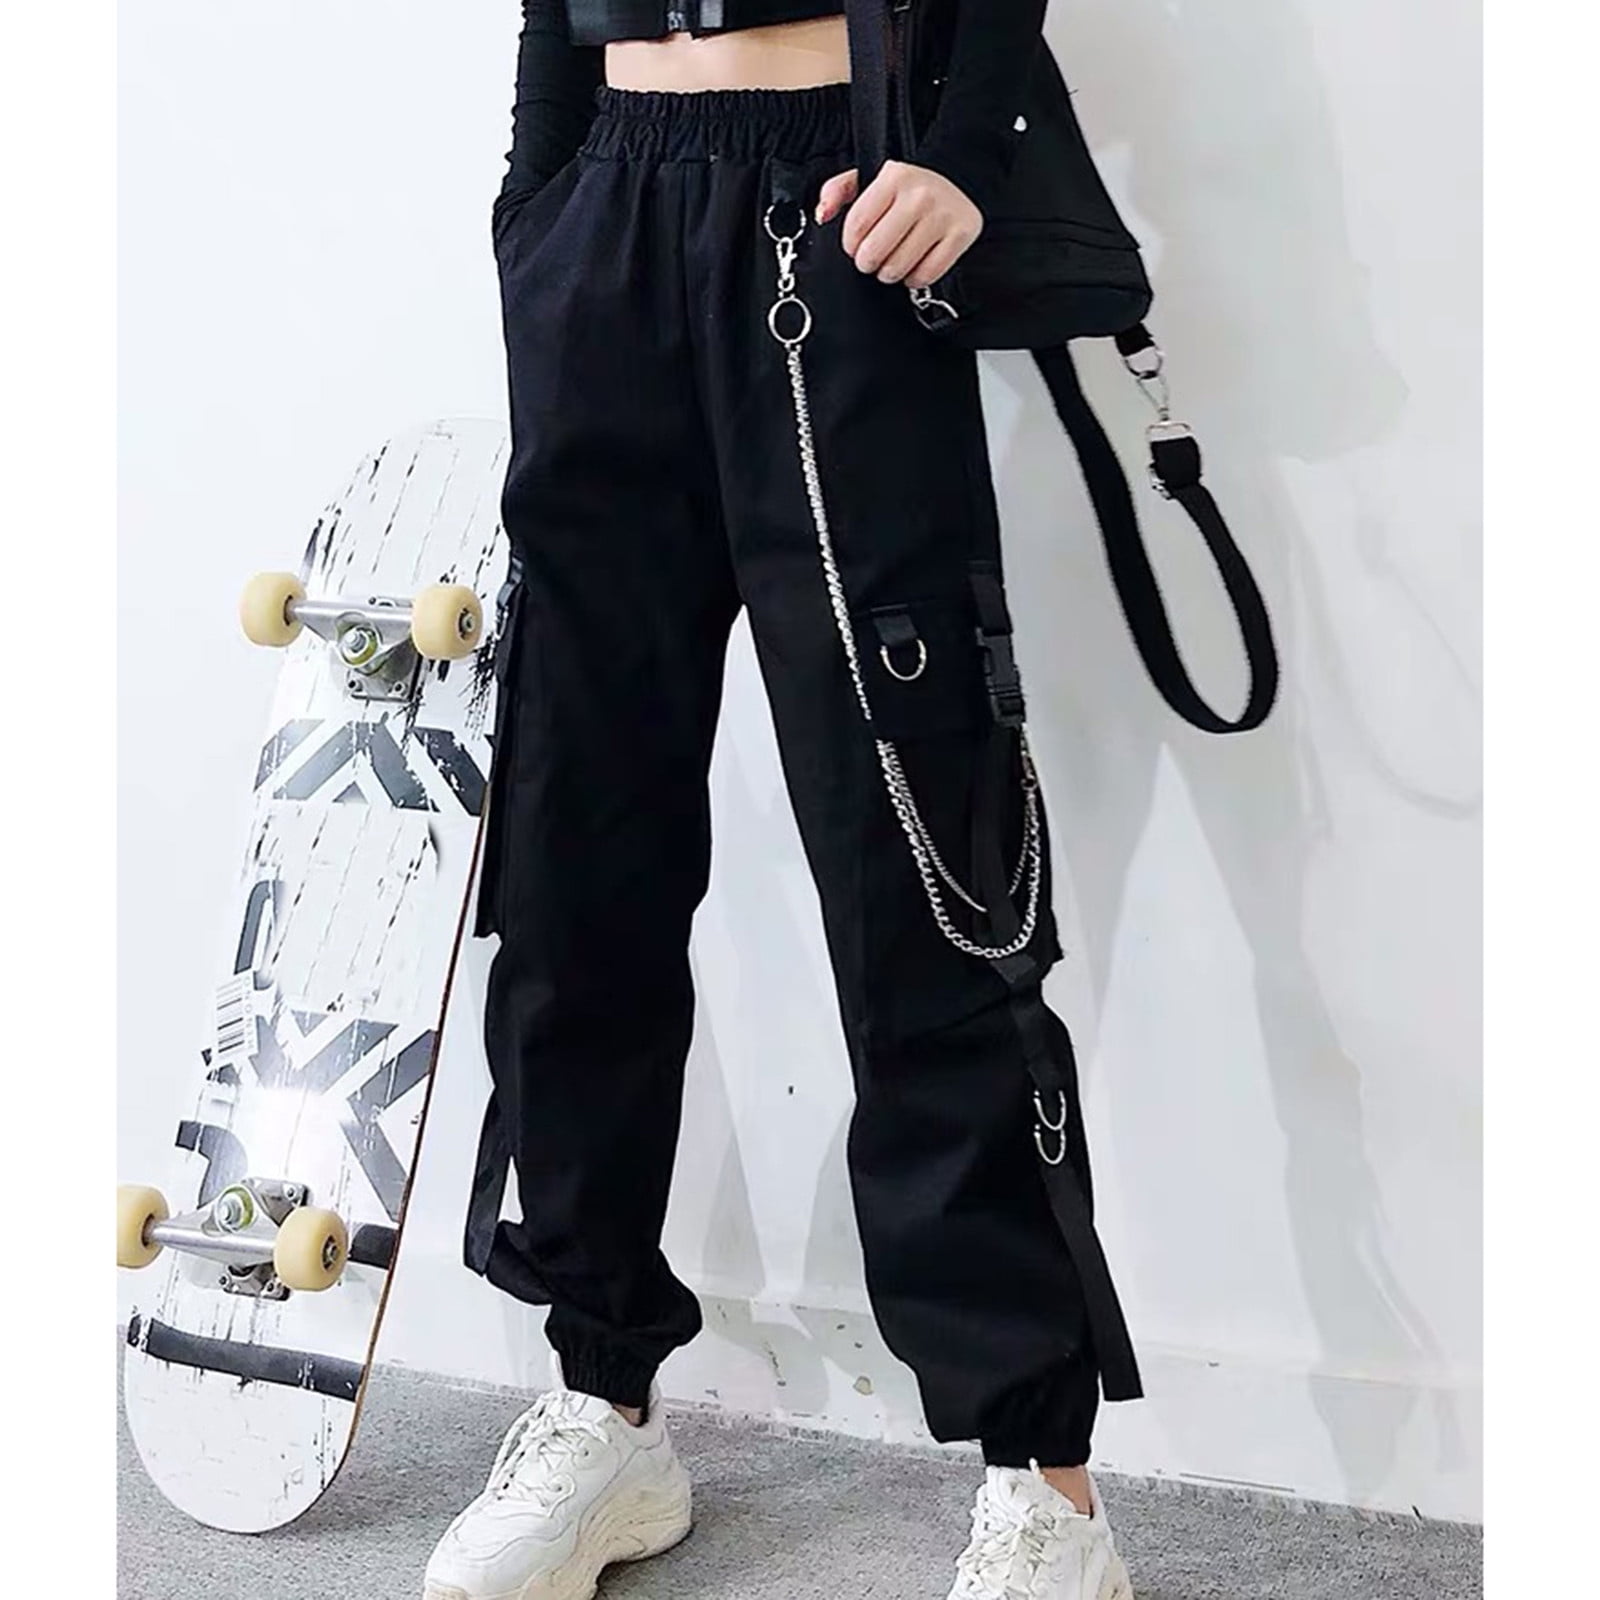 2020 Women Oversized Mom Skater Jeans Lady Plus Size 5xl Baggy Cropped Pants  Student Straight Denim Jeans Autumn Black Trousers - Jeans - AliExpress